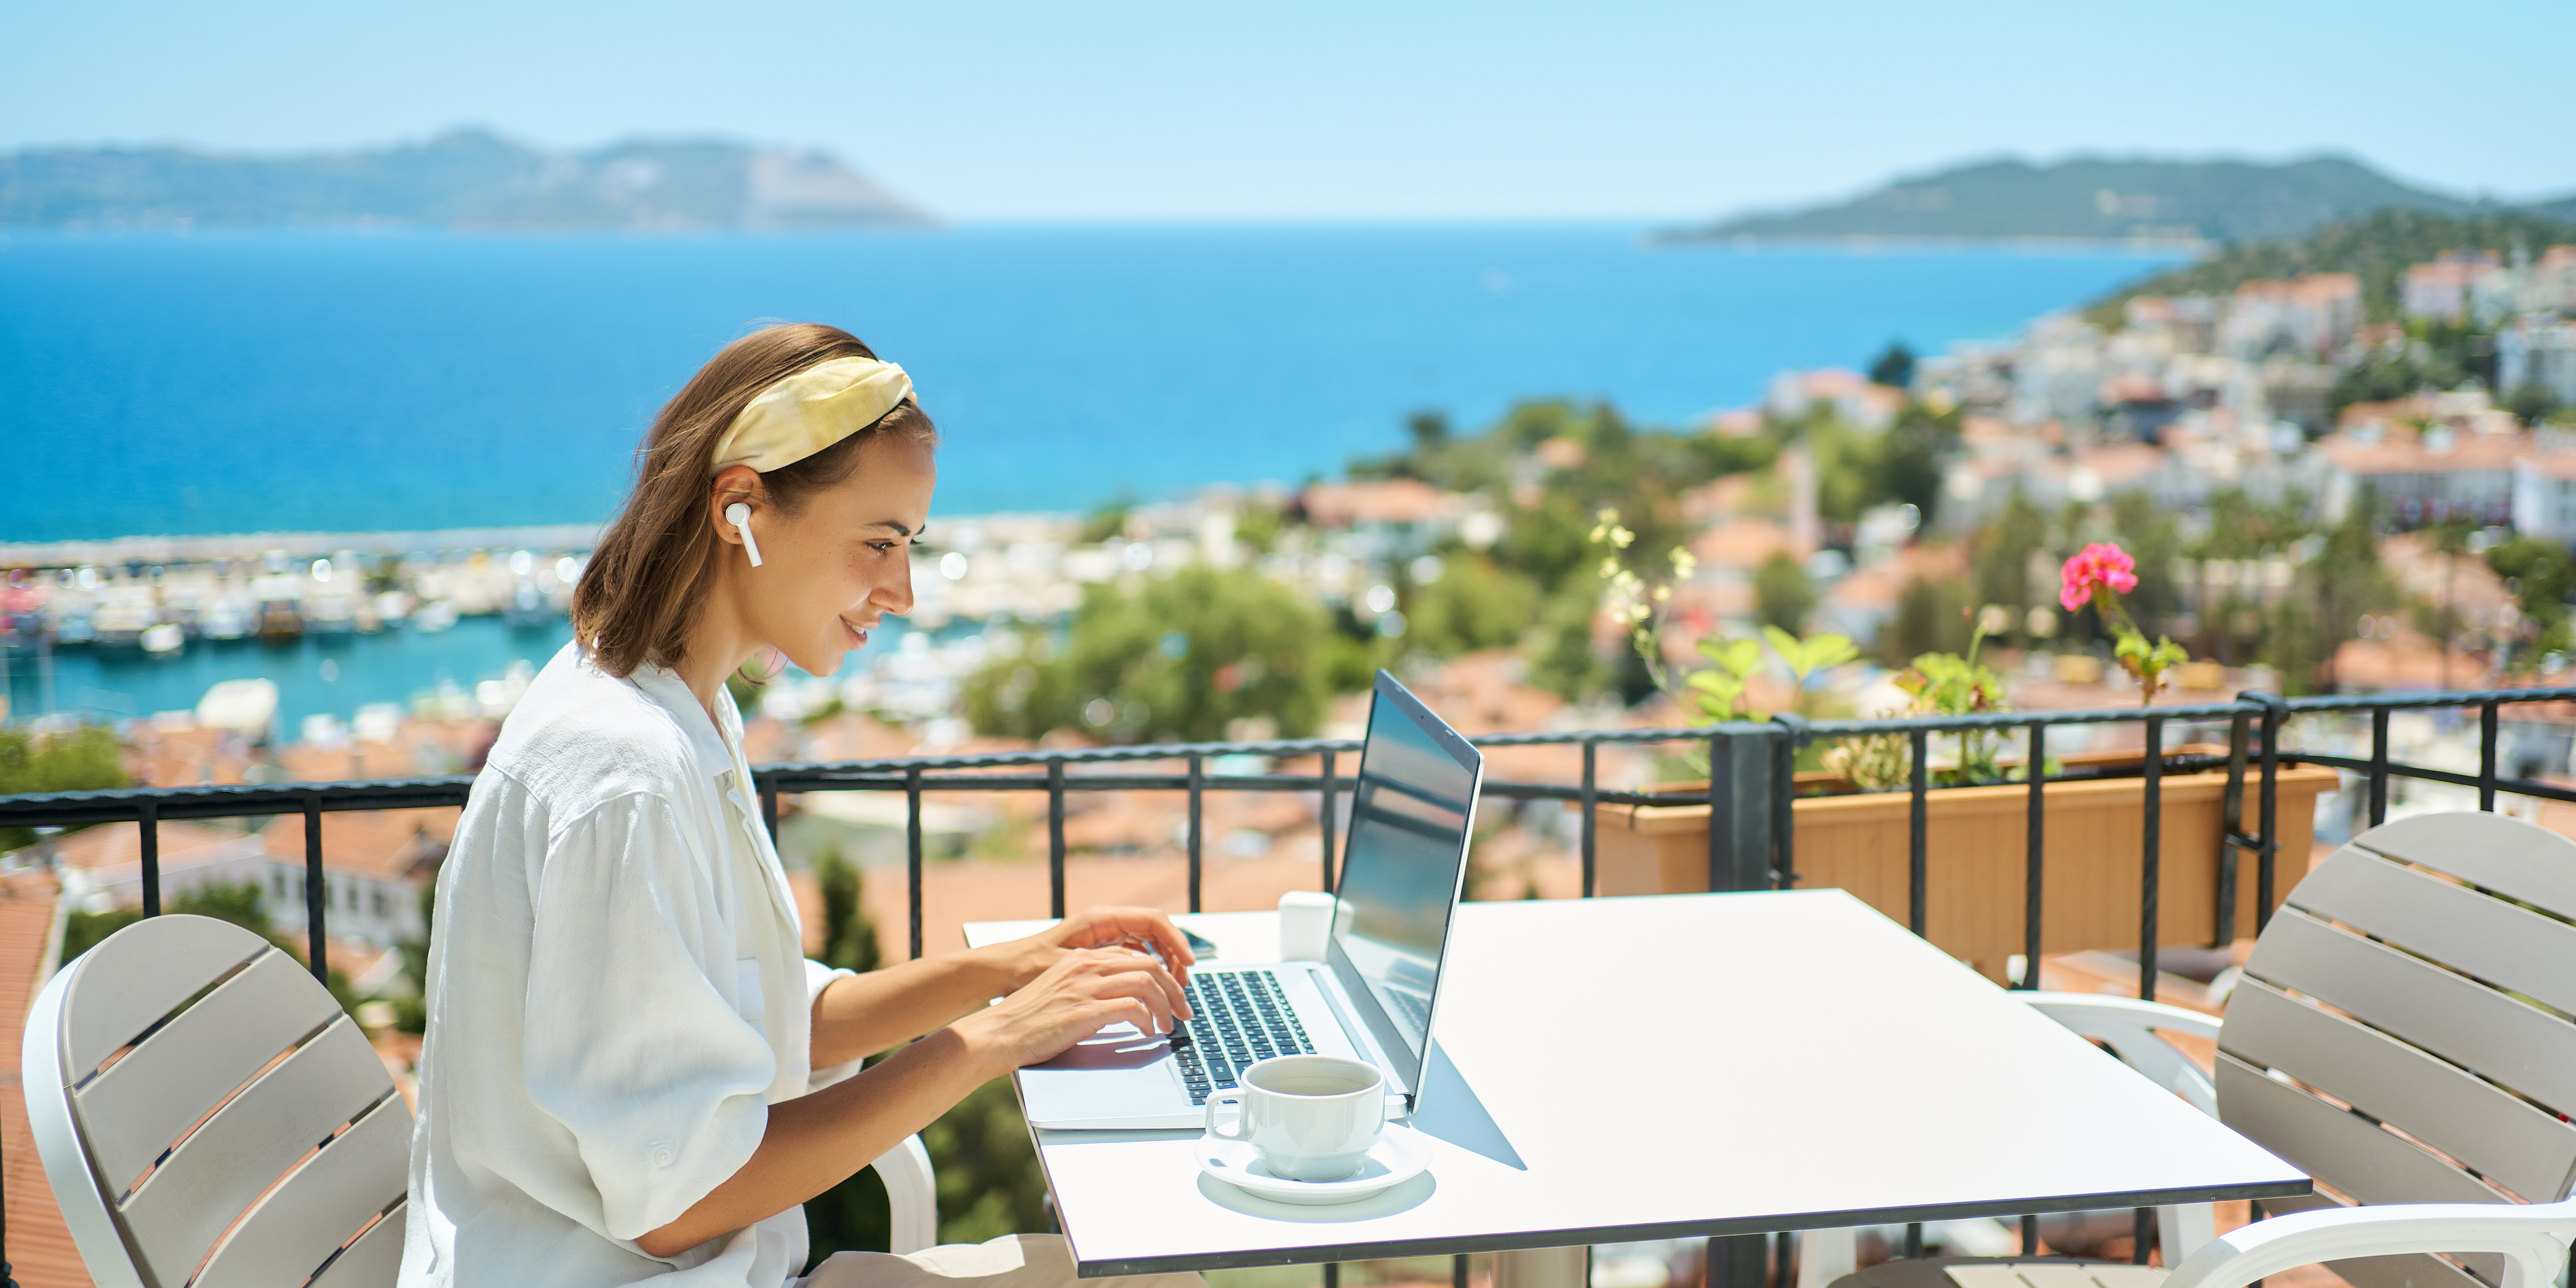 How do you overcome the cyber security skills gap with remote workers?